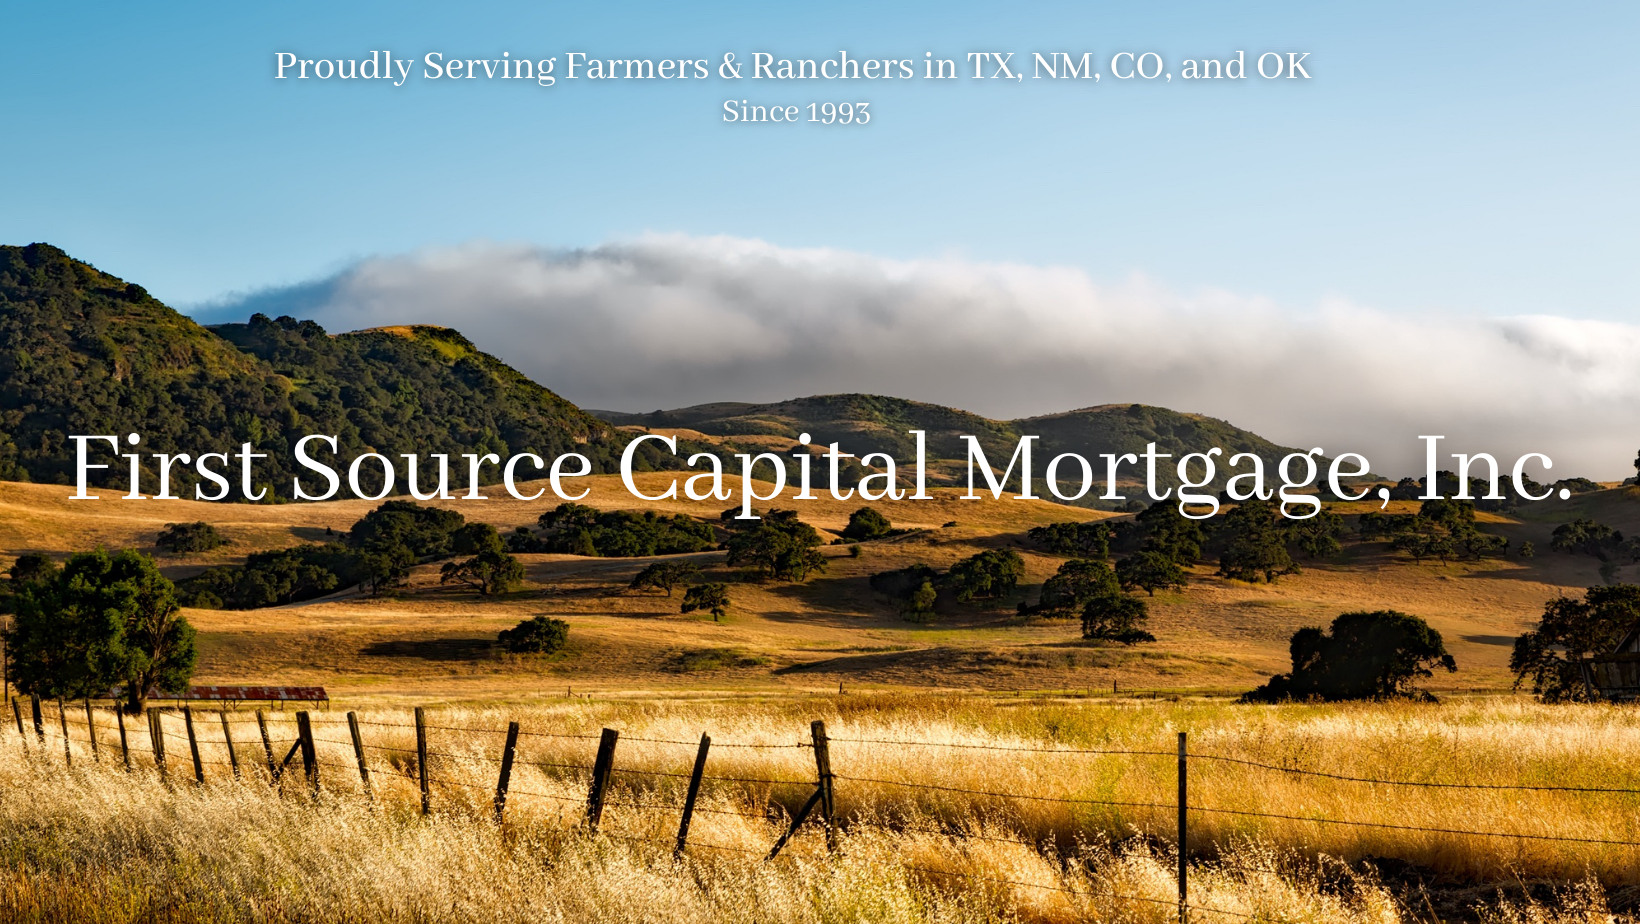 First Source Capital Mortgage Inc